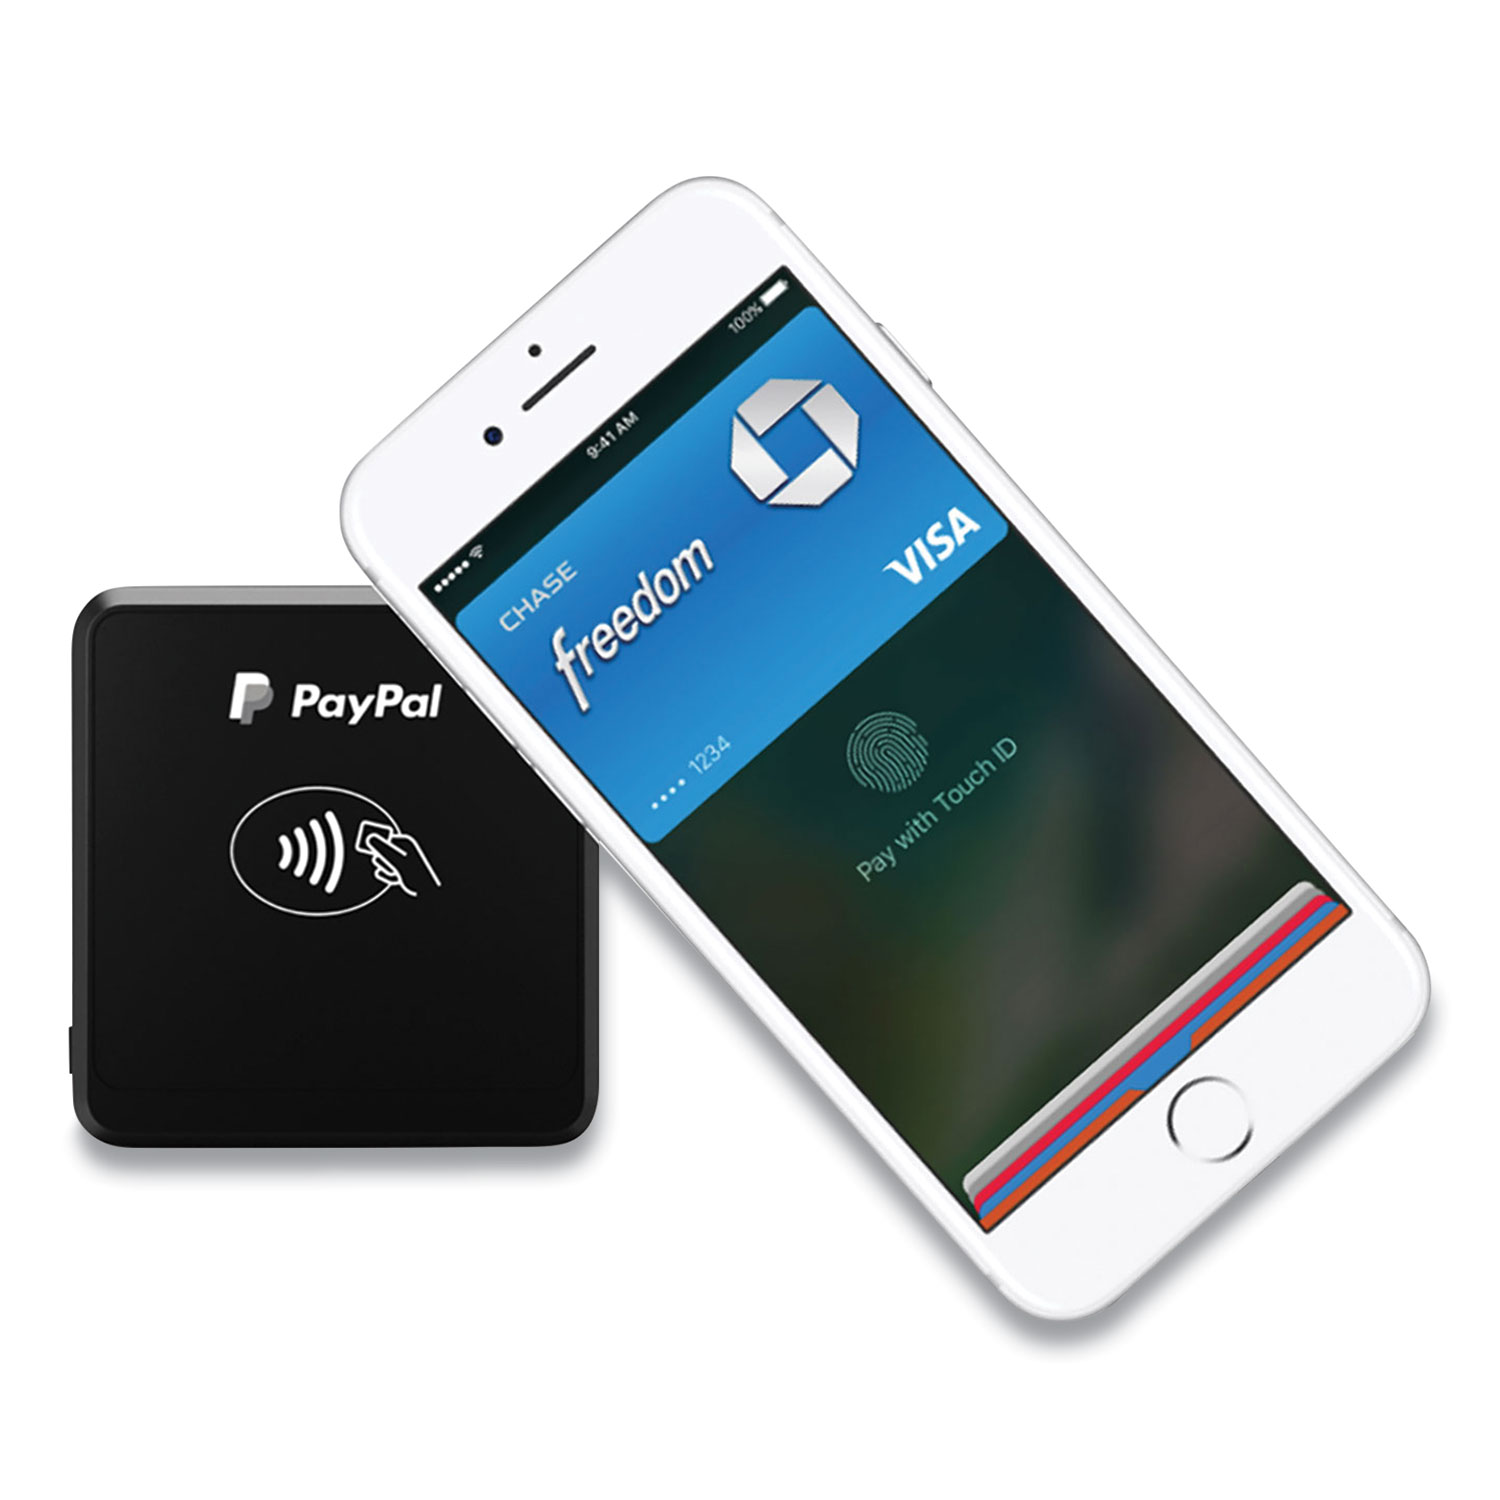  PayPal PP-8151883 Chip and Tap Credit Card Reader, Black (NAX2774174) 